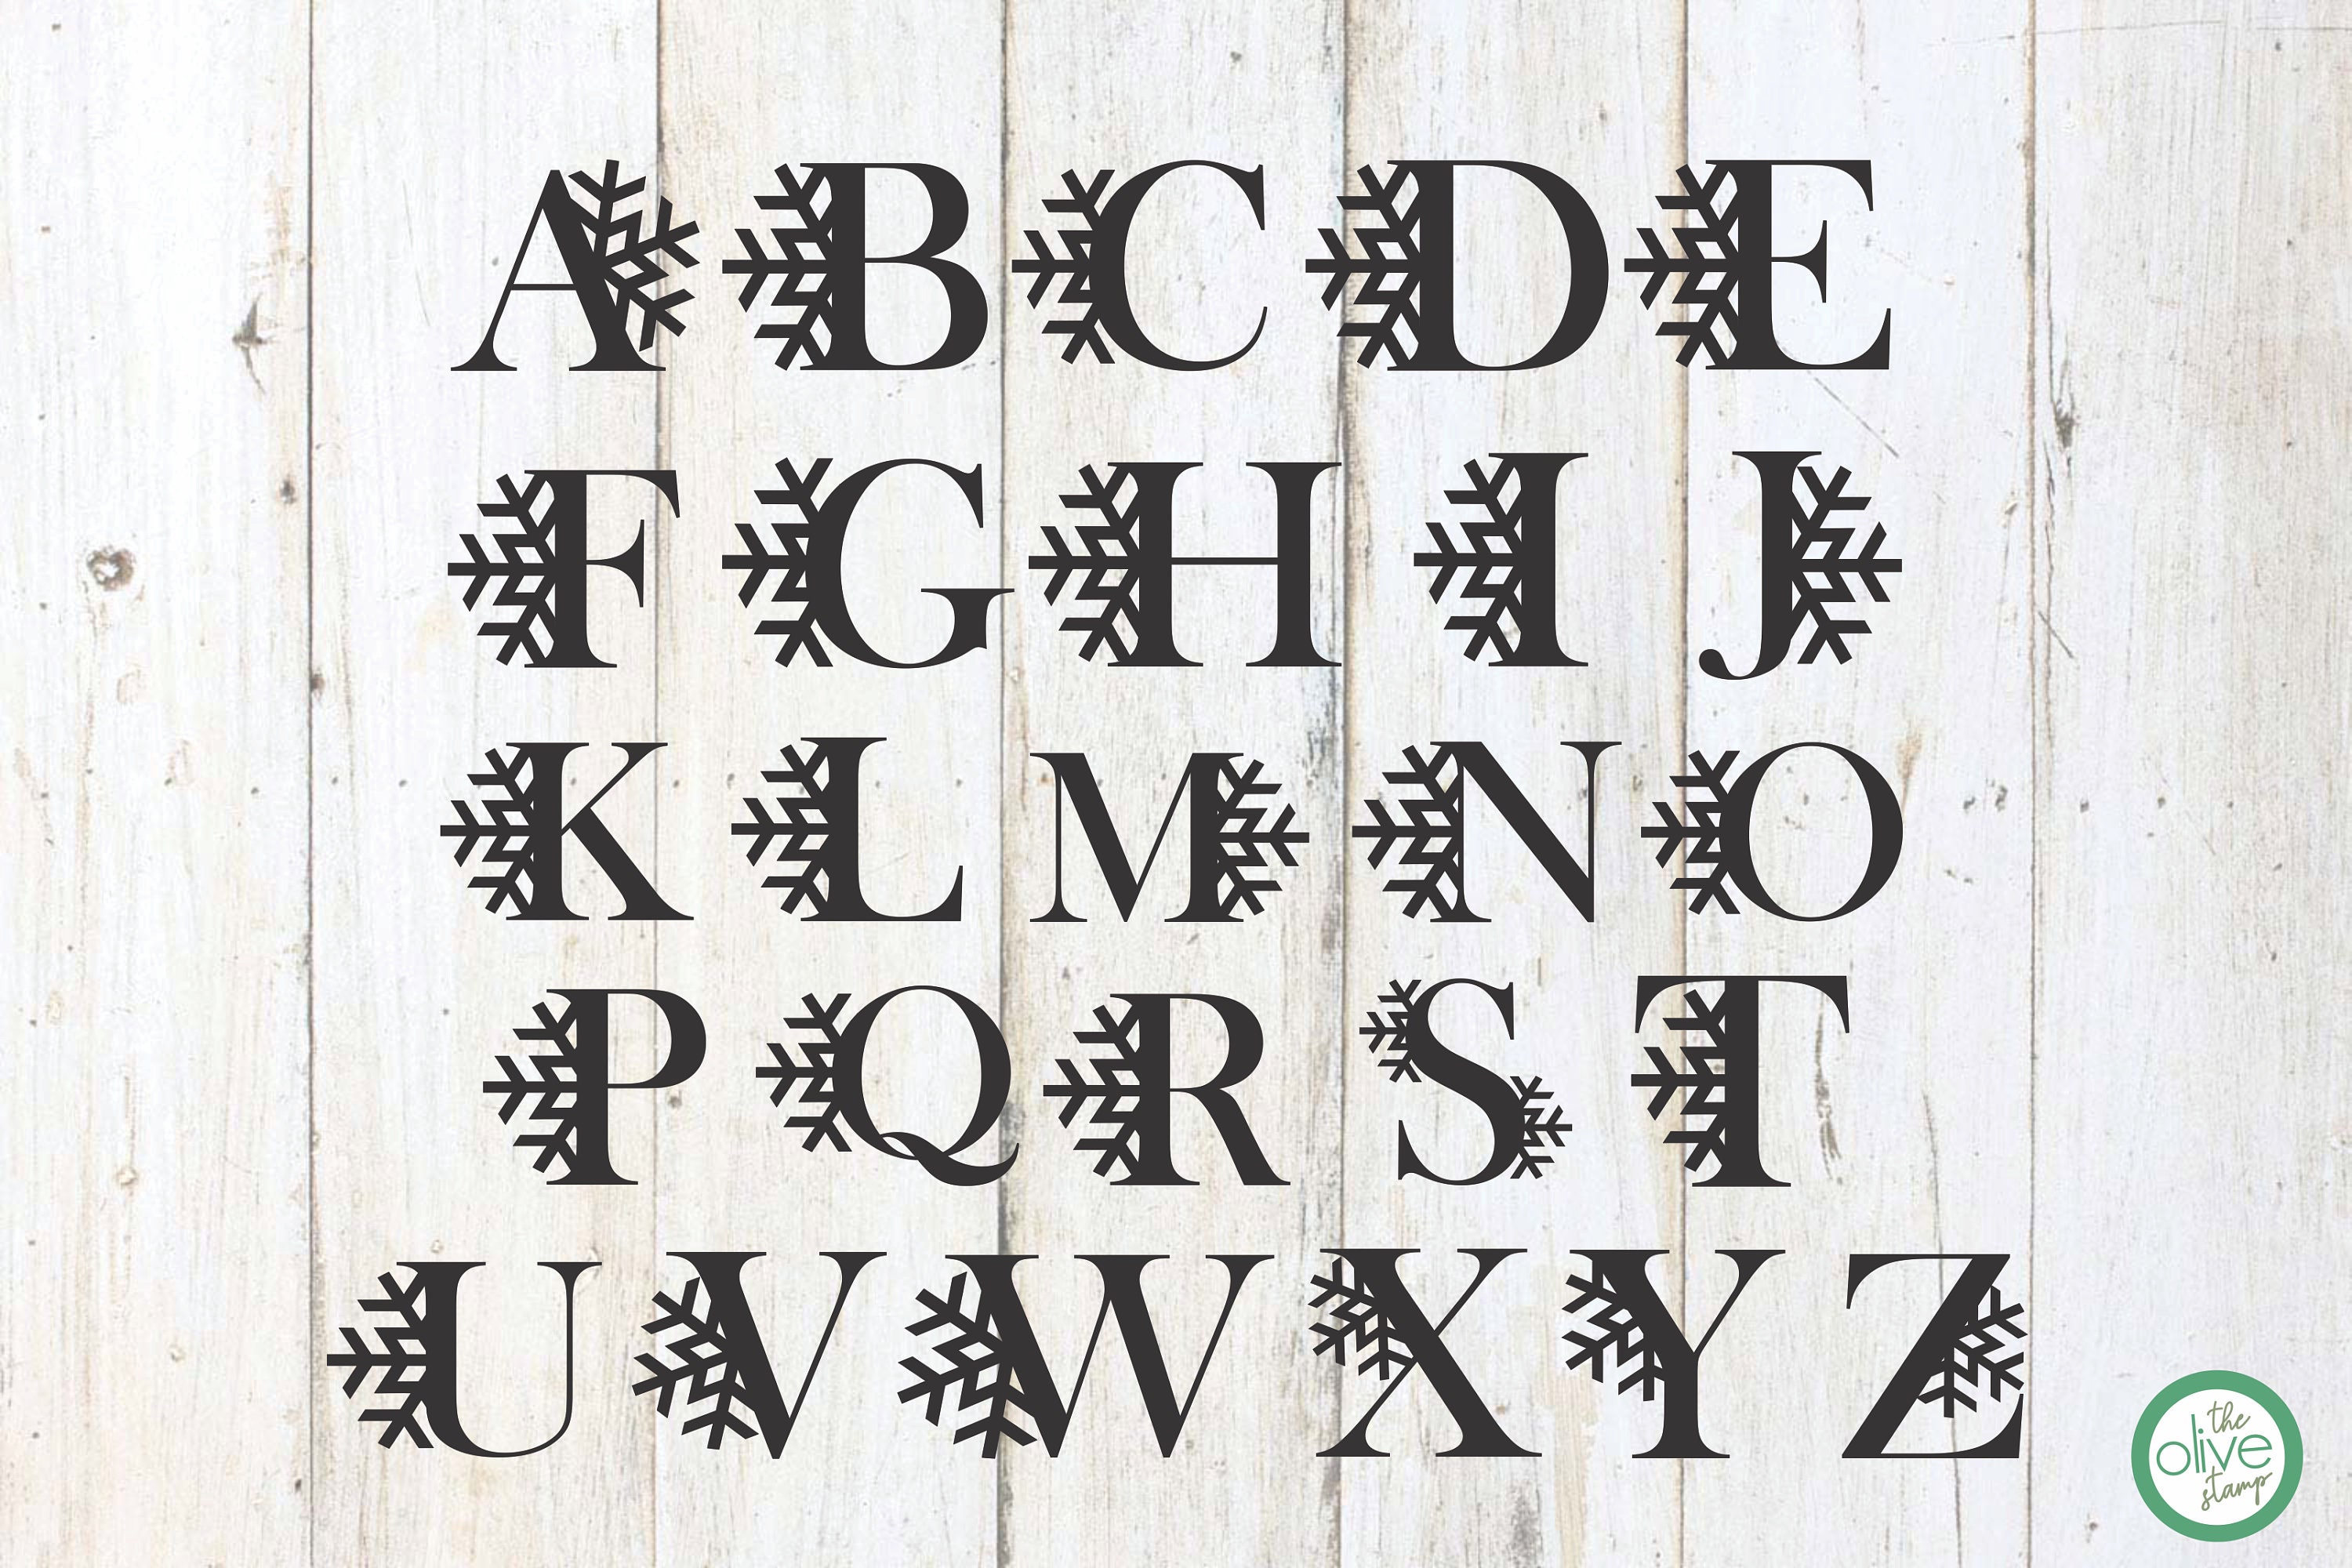 Christmas Alphabet Font (Letters, Patterns with Snow) – DIY Projects,  Patterns, Monograms, Designs, Templates